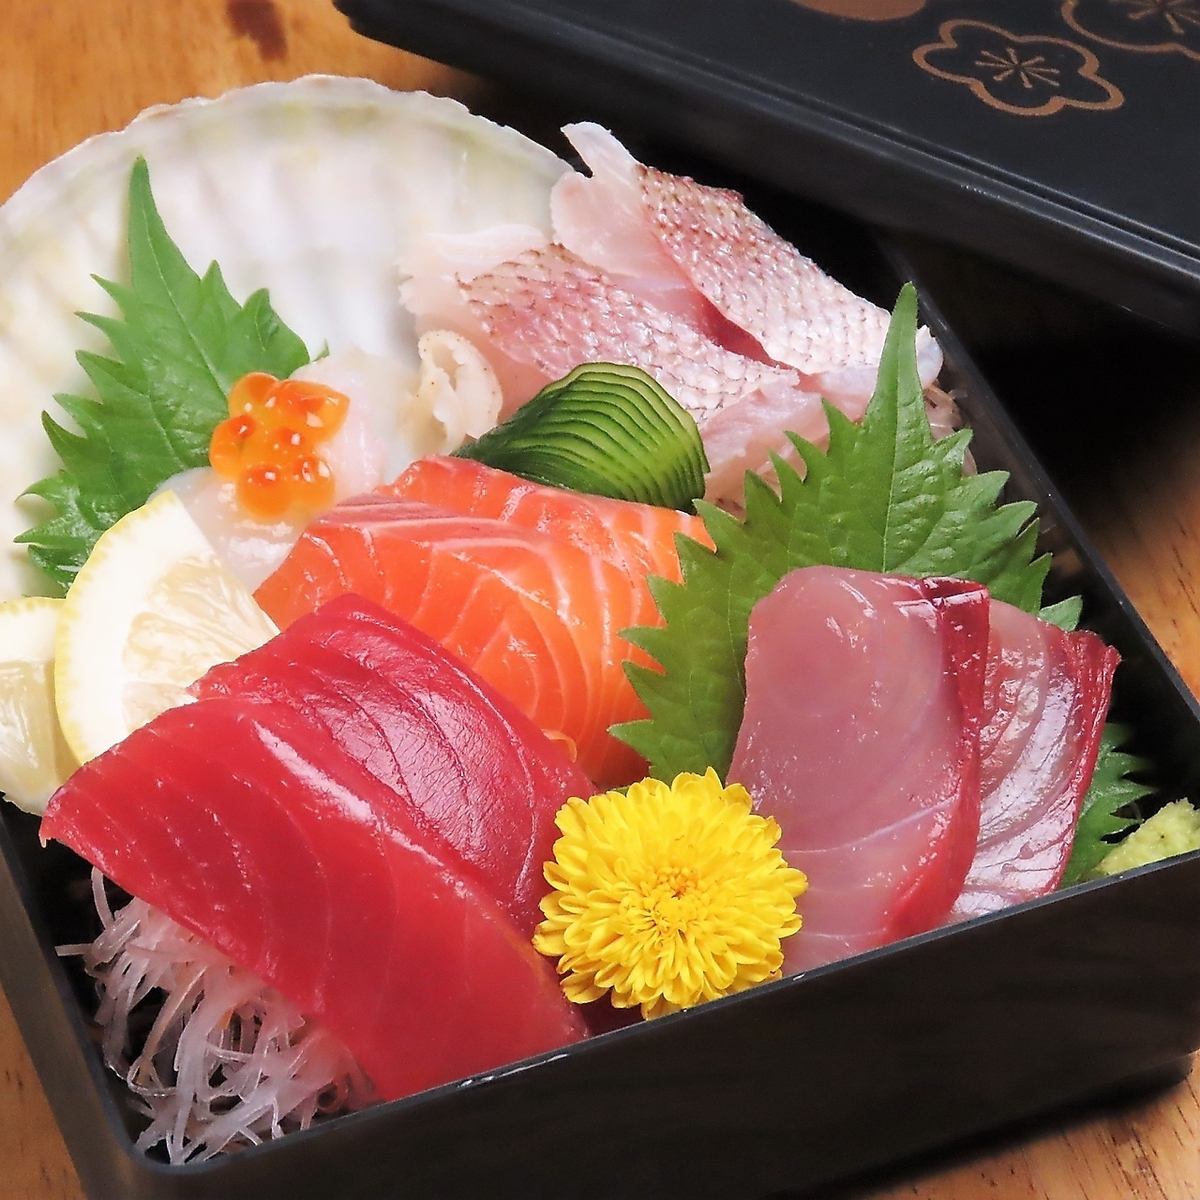 We offer 5 types of sashimi, which change depending on what's in stock, for just 550 yen!